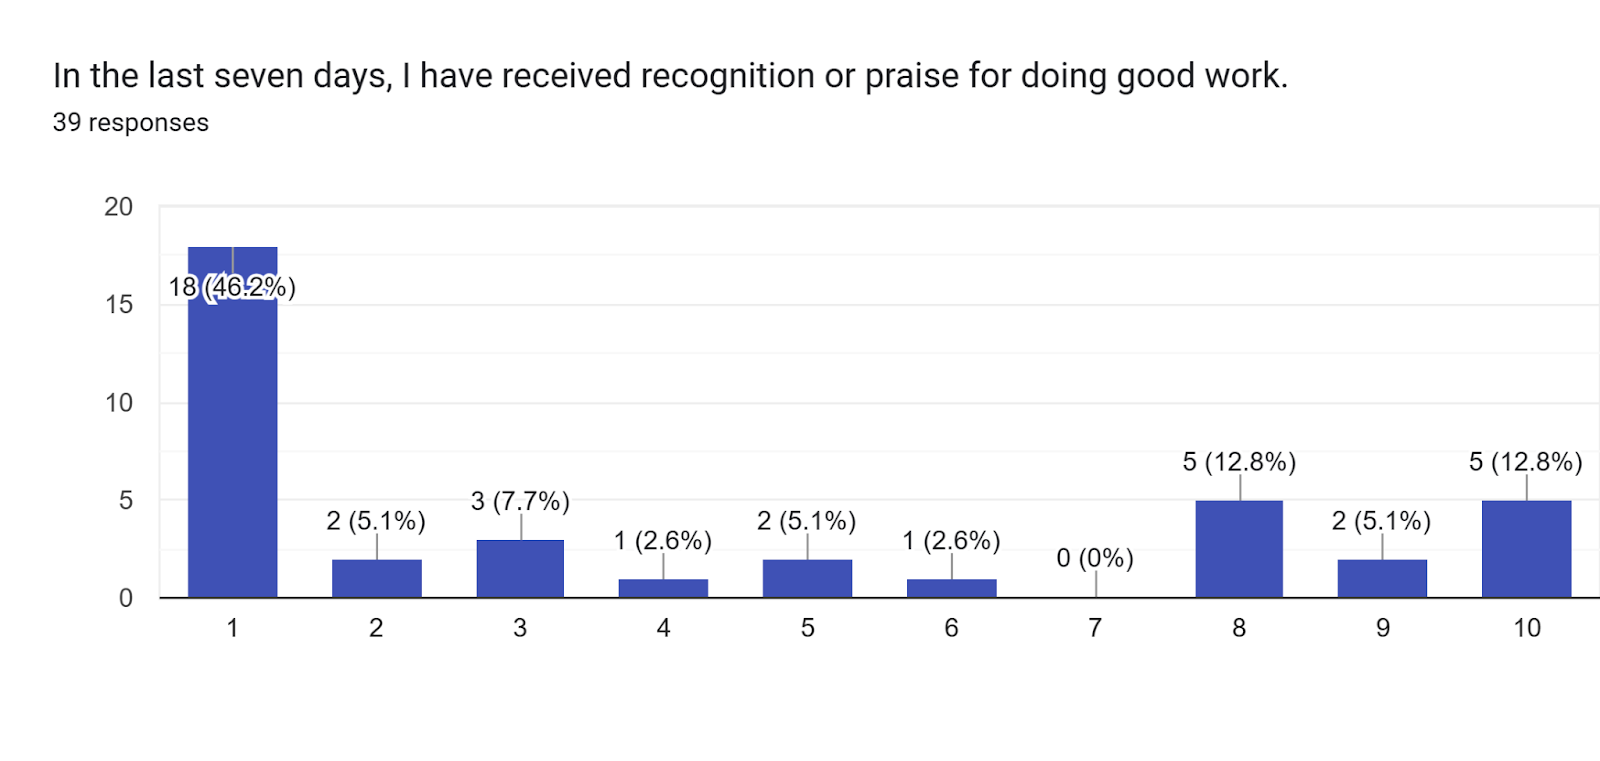 Forms response chart. Question title: In the last seven days, I have received recognition or praise for doing good work.. Number of responses: 39 responses.